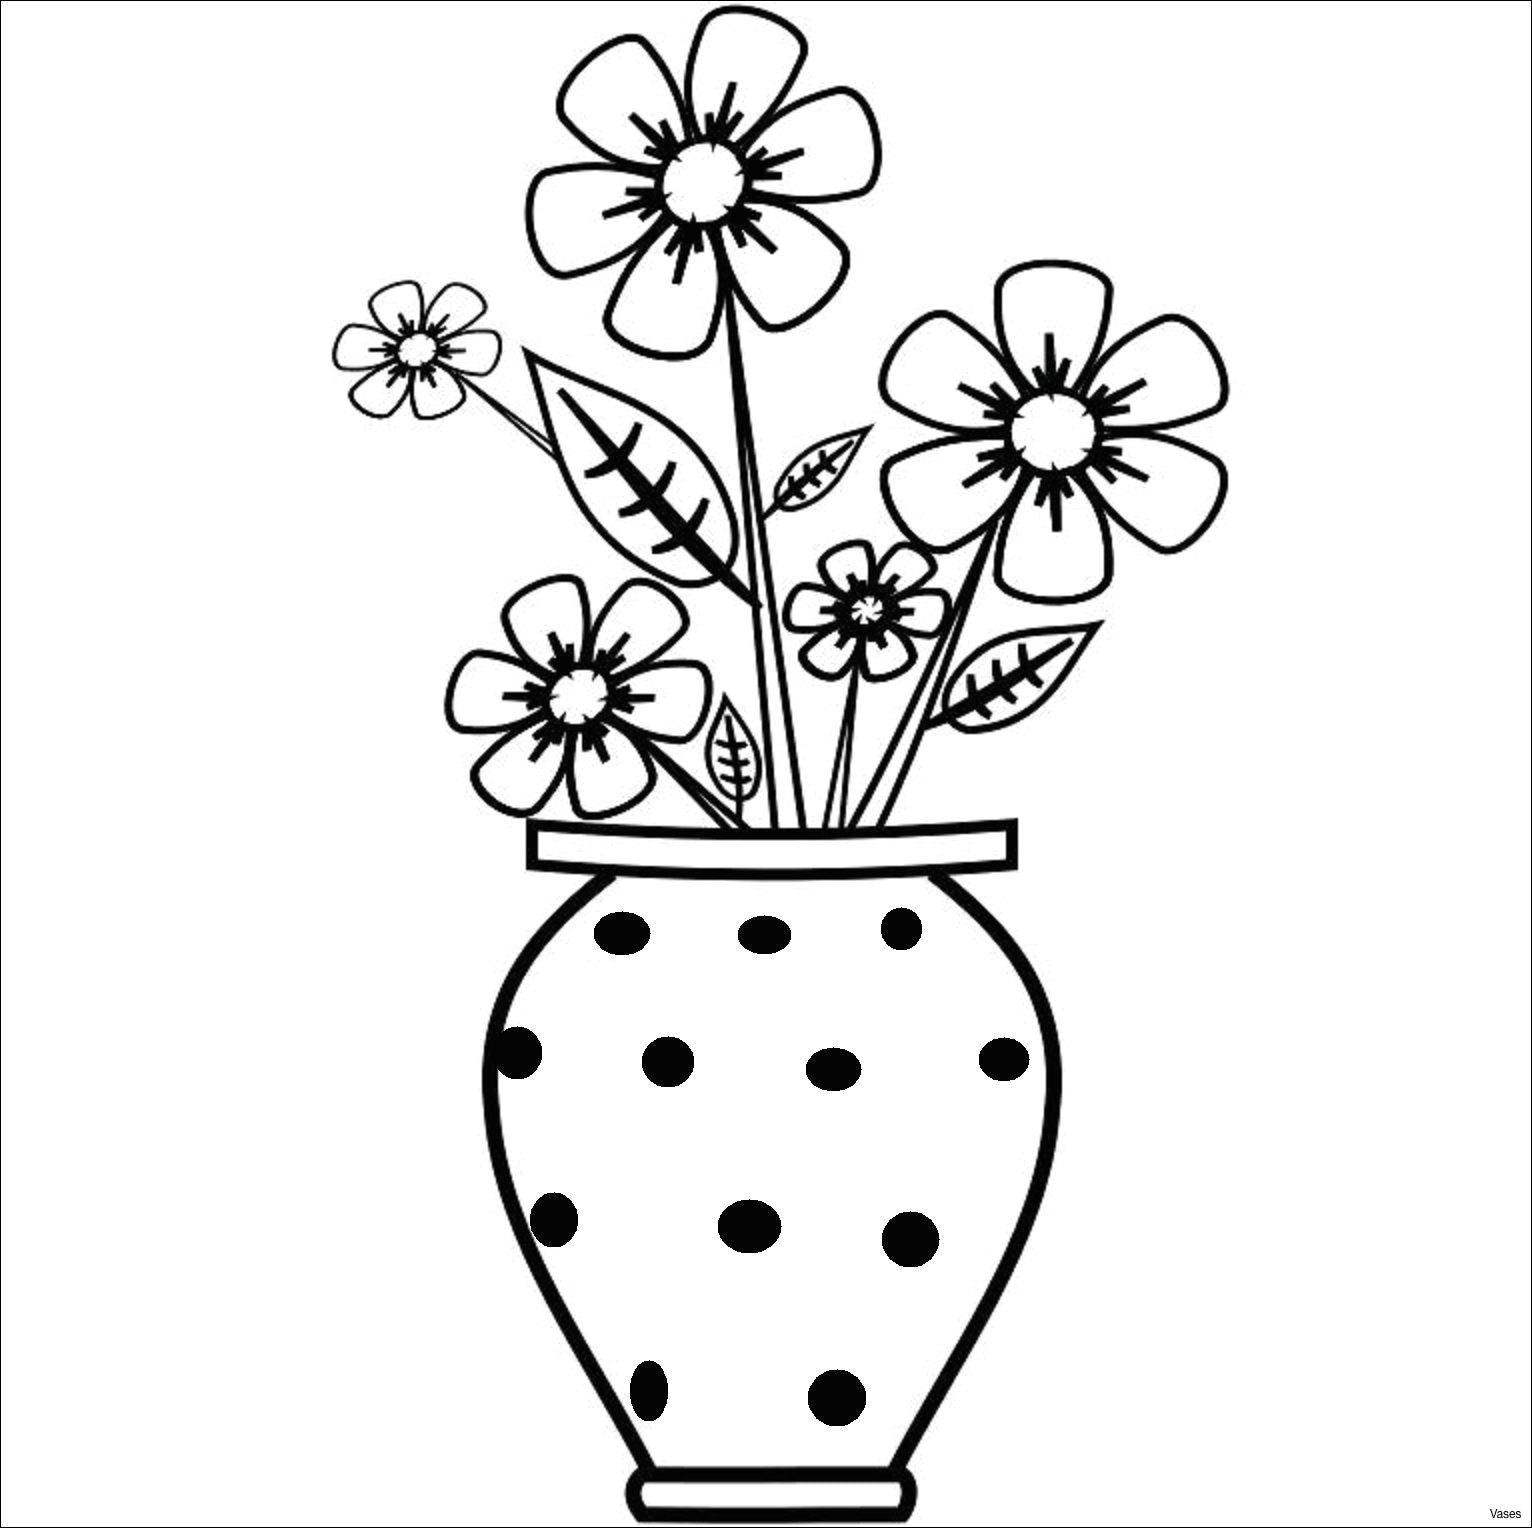 pics of drawings easy vase art drawings how to draw a vase step 2h vases by